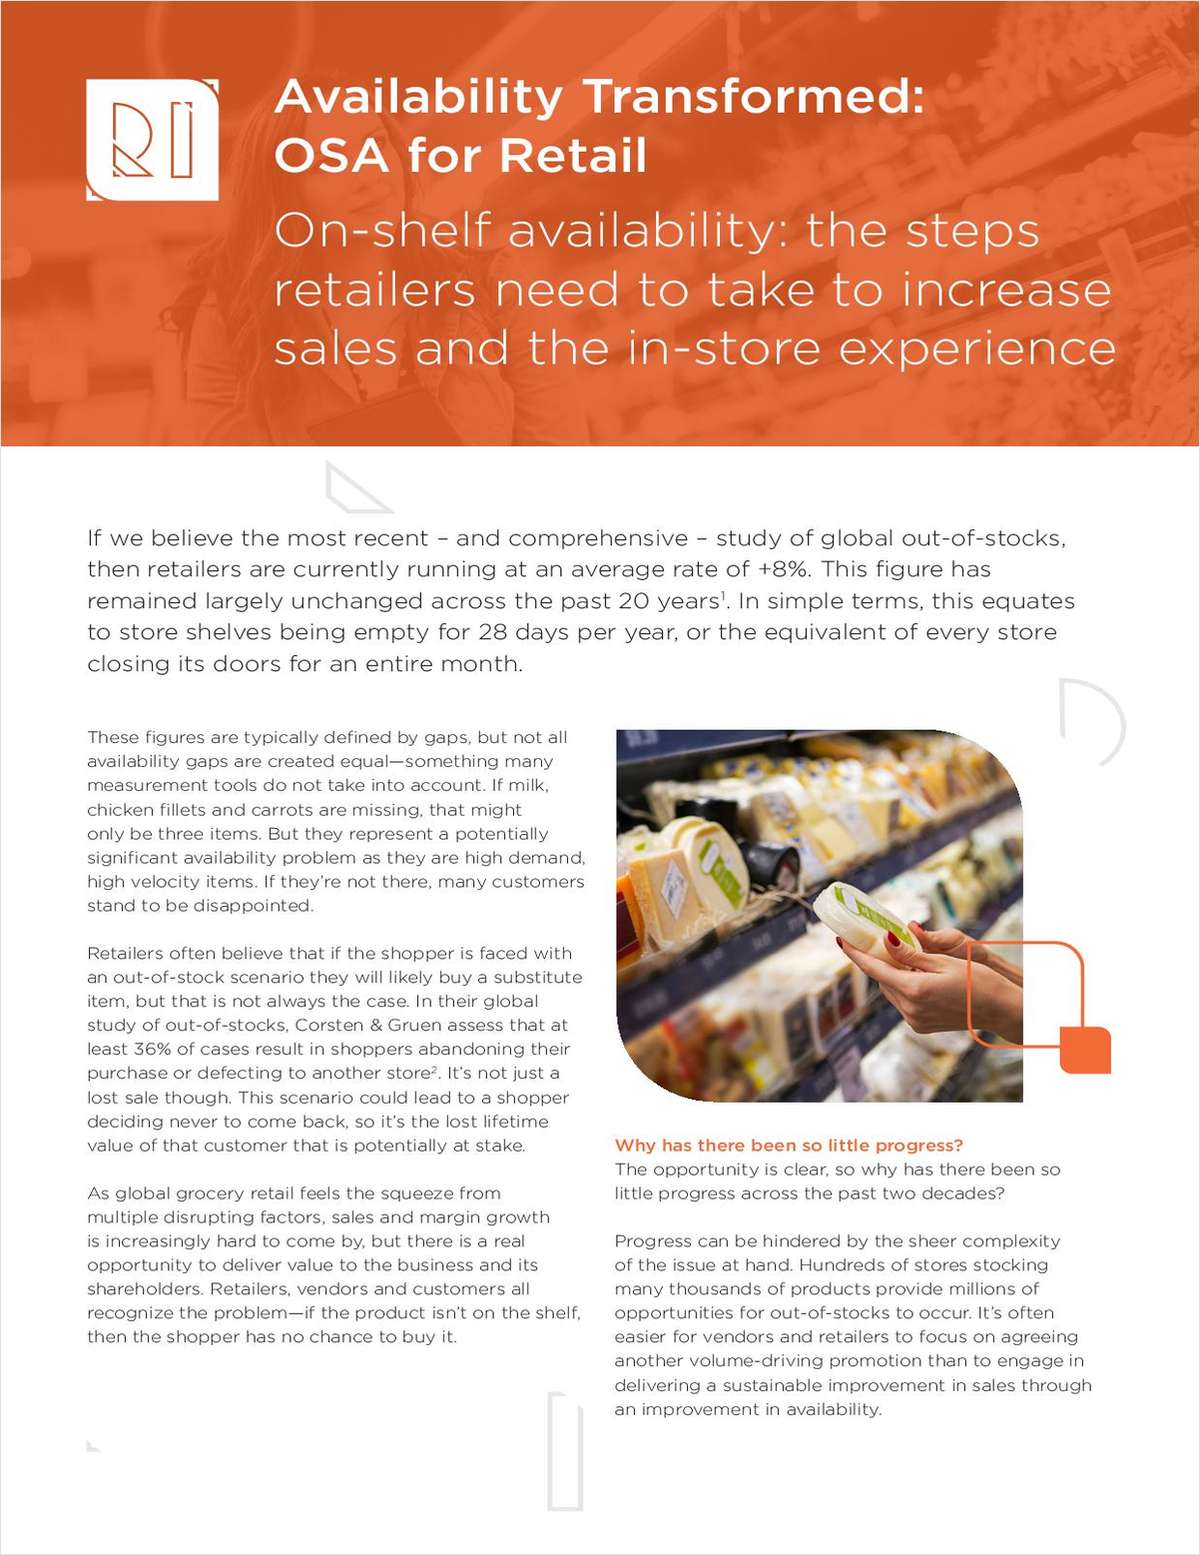 Availability Transformed: OSA for Retail